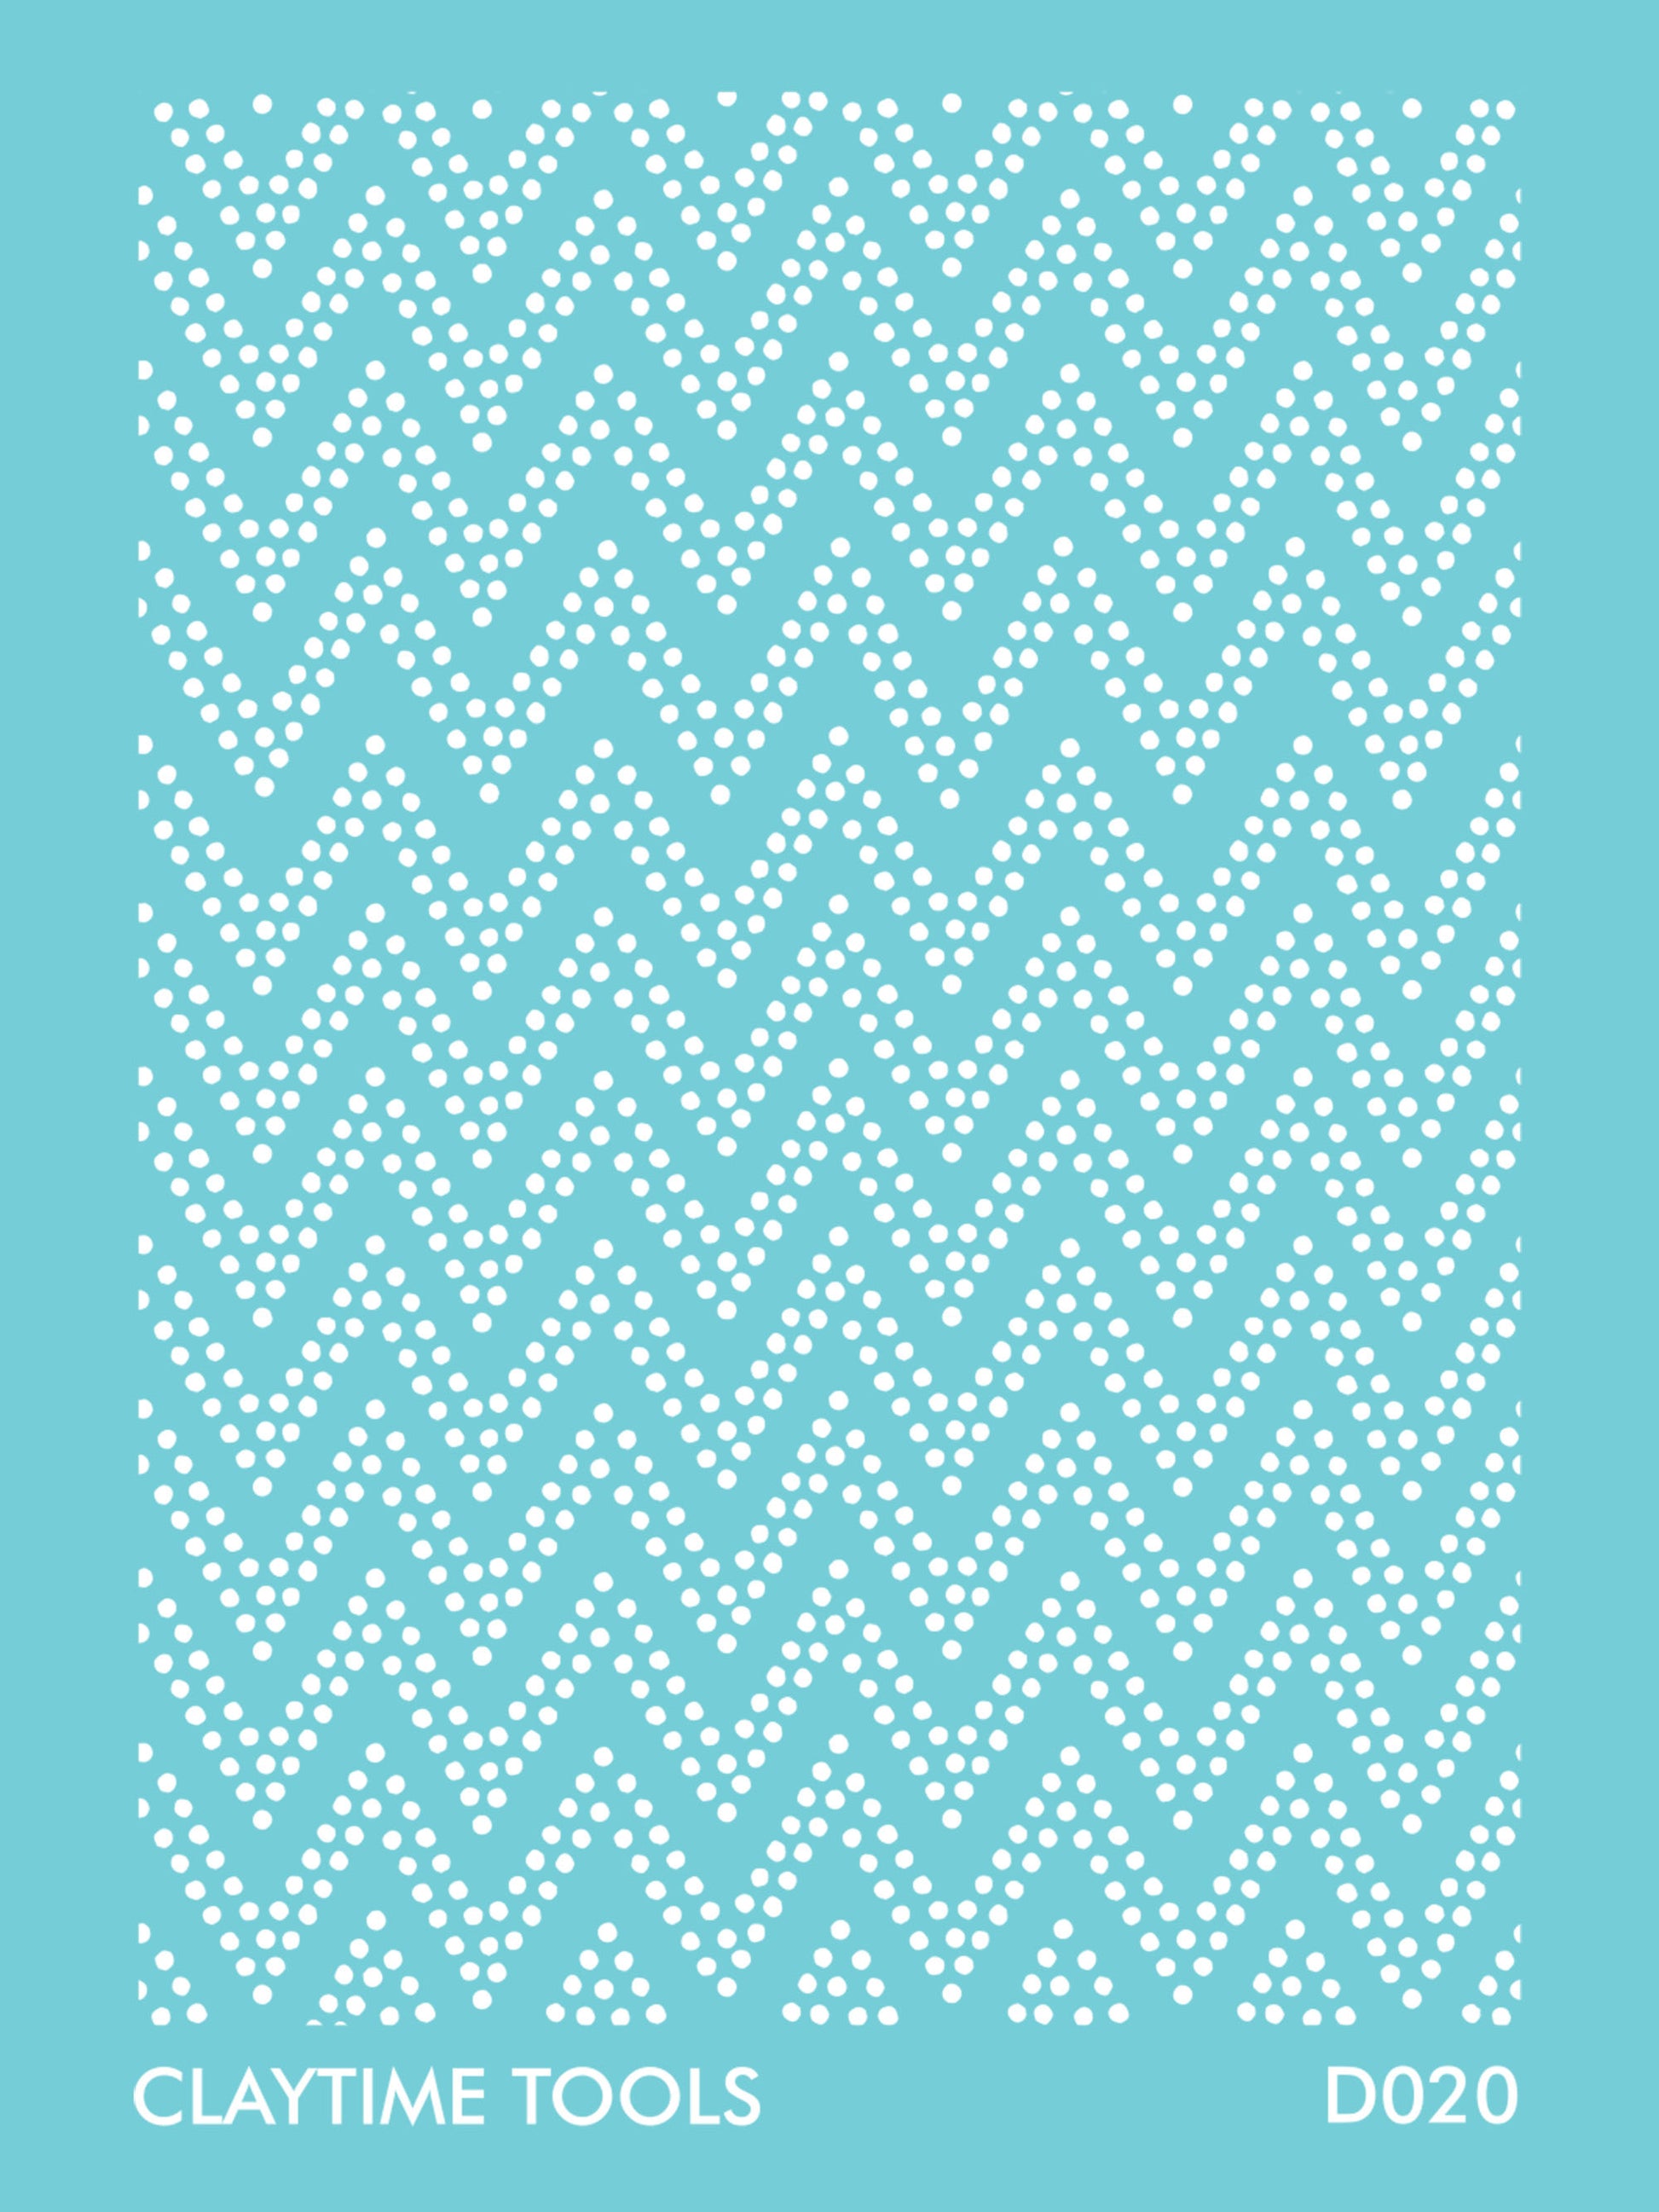 Silkscreen with dots in zig zag pattern